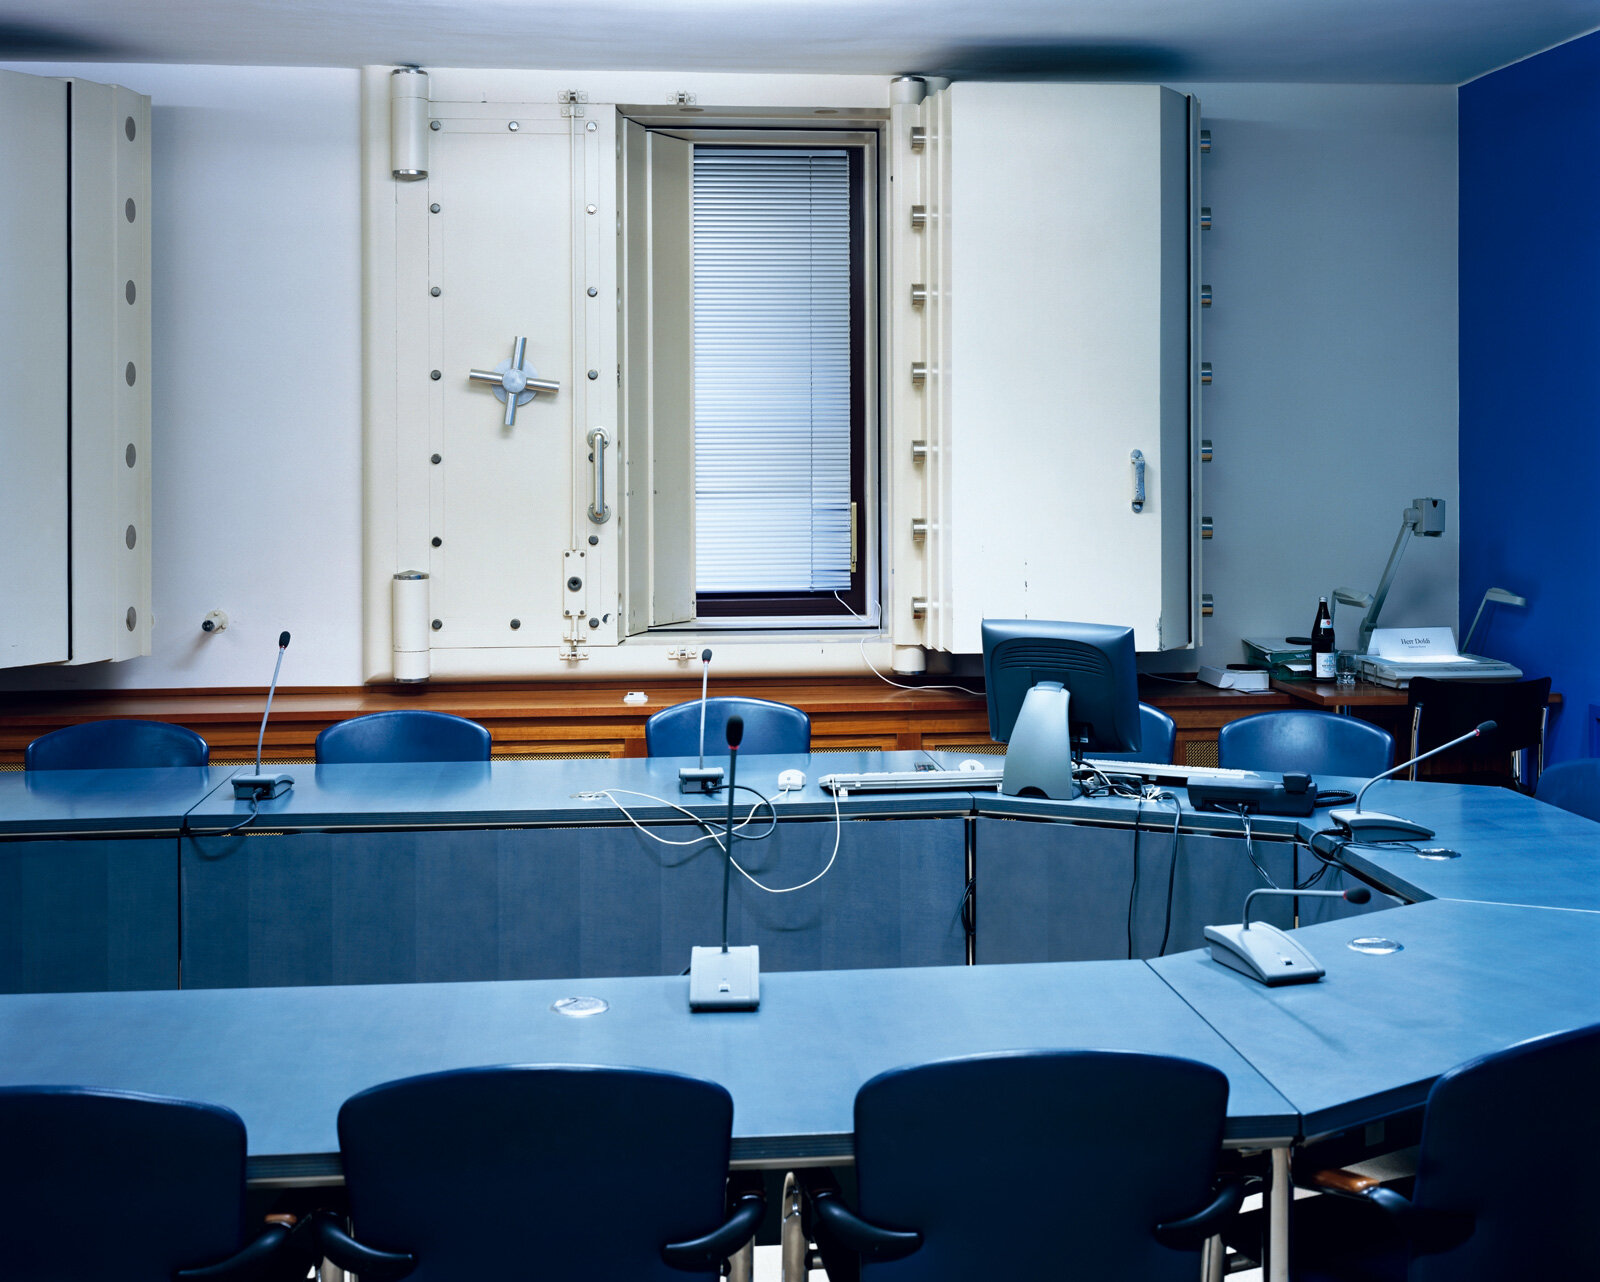  Crisis Reaction Center, Foreign Ministry, Berlin 2008 